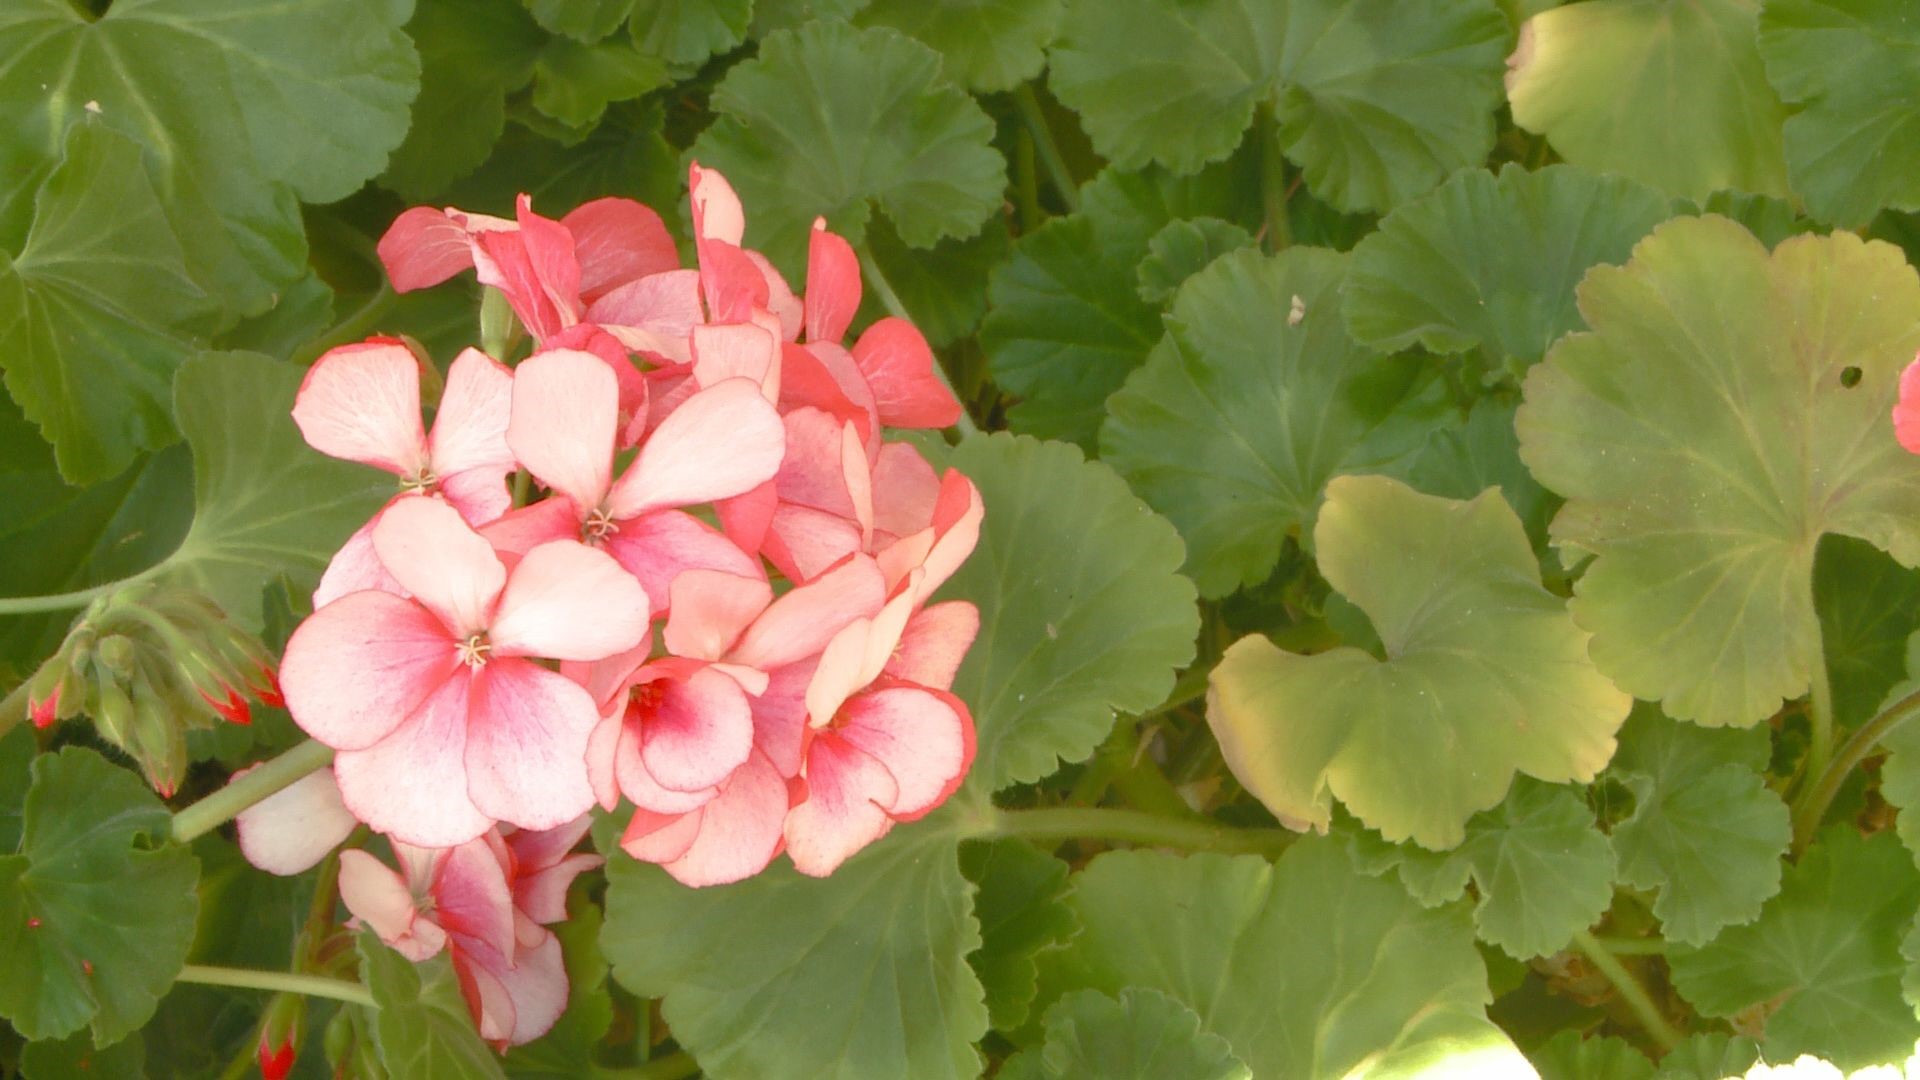 Everyone likes free plants! If you saved your geraniums from last year, you can make new ones.